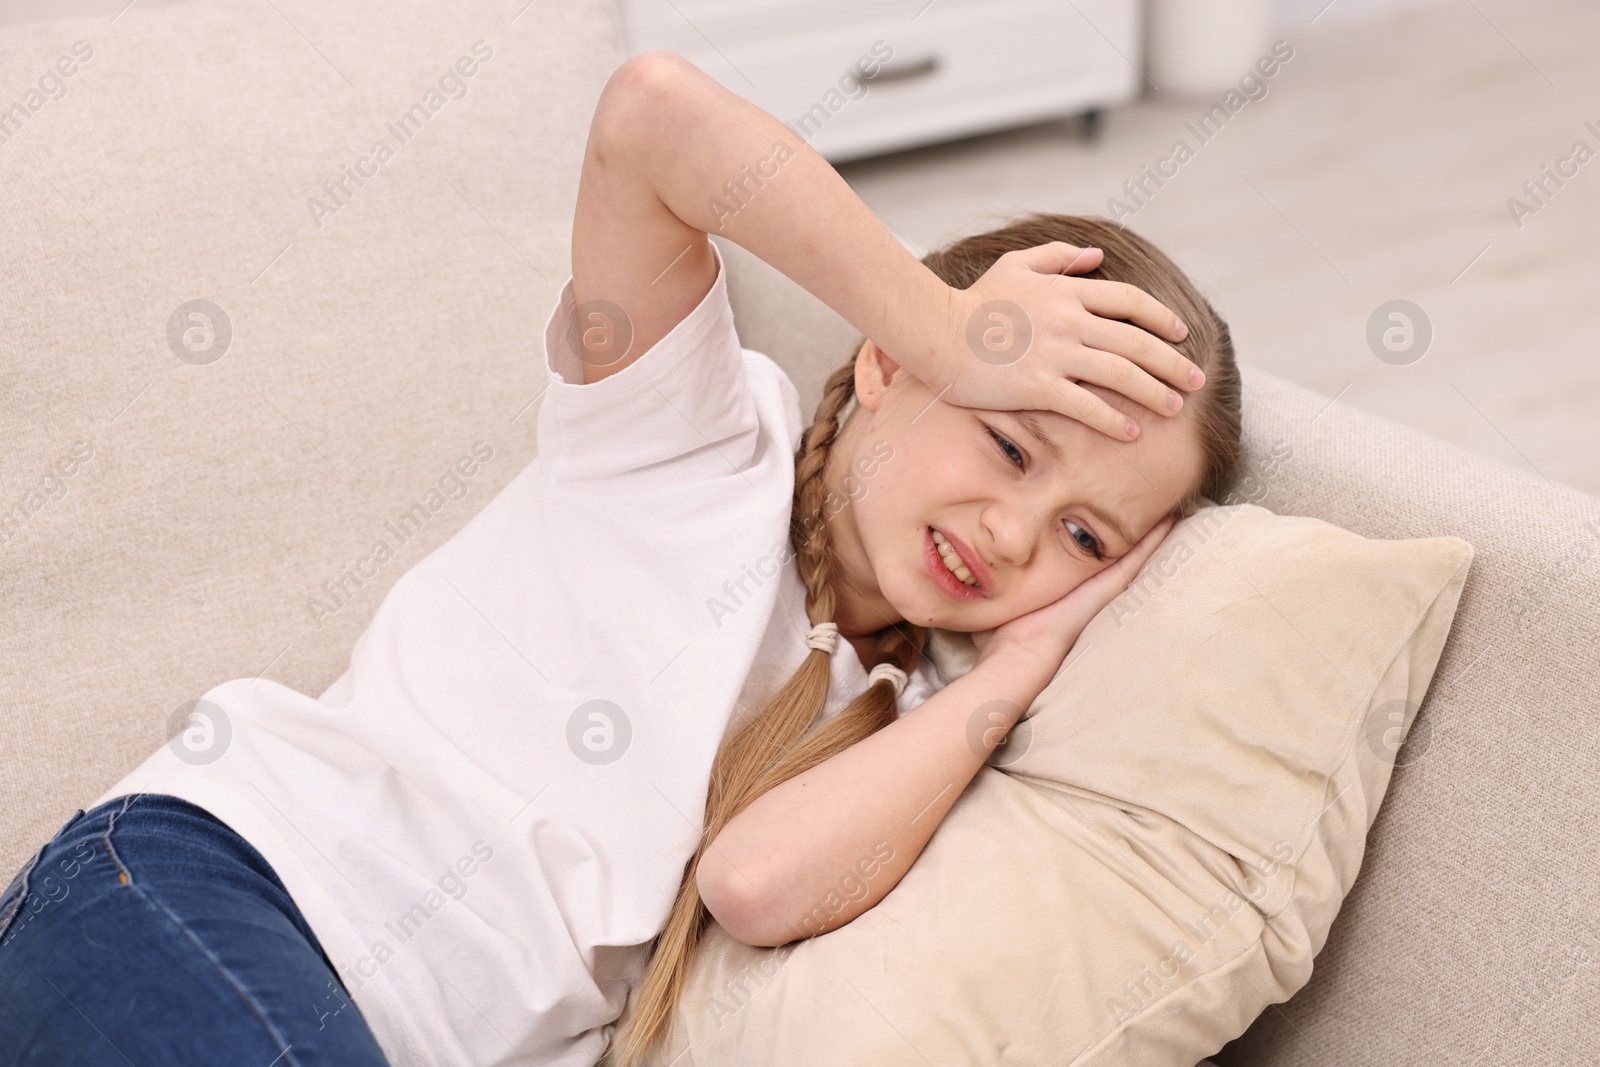 Photo of Little girl suffering from headache on sofa indoors